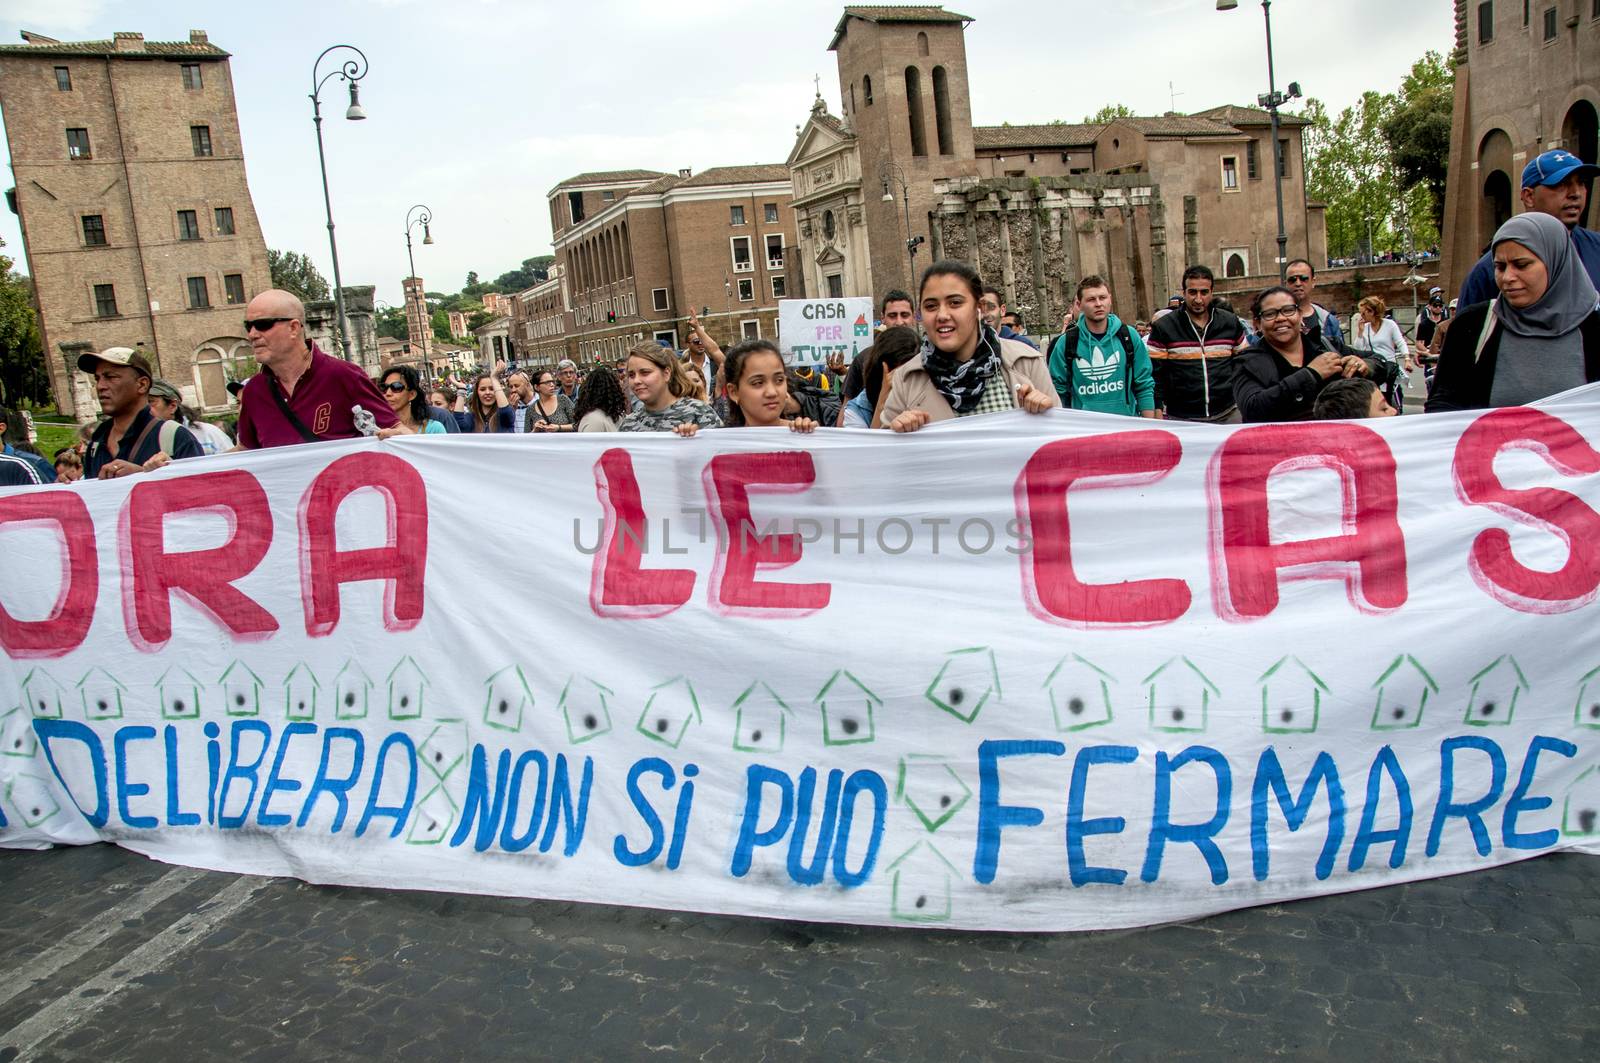 ITALY, Rome: Protesters hold a banner reading Now the house during a demonstration, called by the Movements for the Right to Housing, to protest against forced housing evictions and to ask for the right to housing in Rome, Italy on April 16, 2016. Thousands of 'Housing Rights' activists took to the street in Rome to protest against forced housing evictions, to ask for the respect of accommodation right and use more public funds to help people without homes or those who cannot pay their rent.